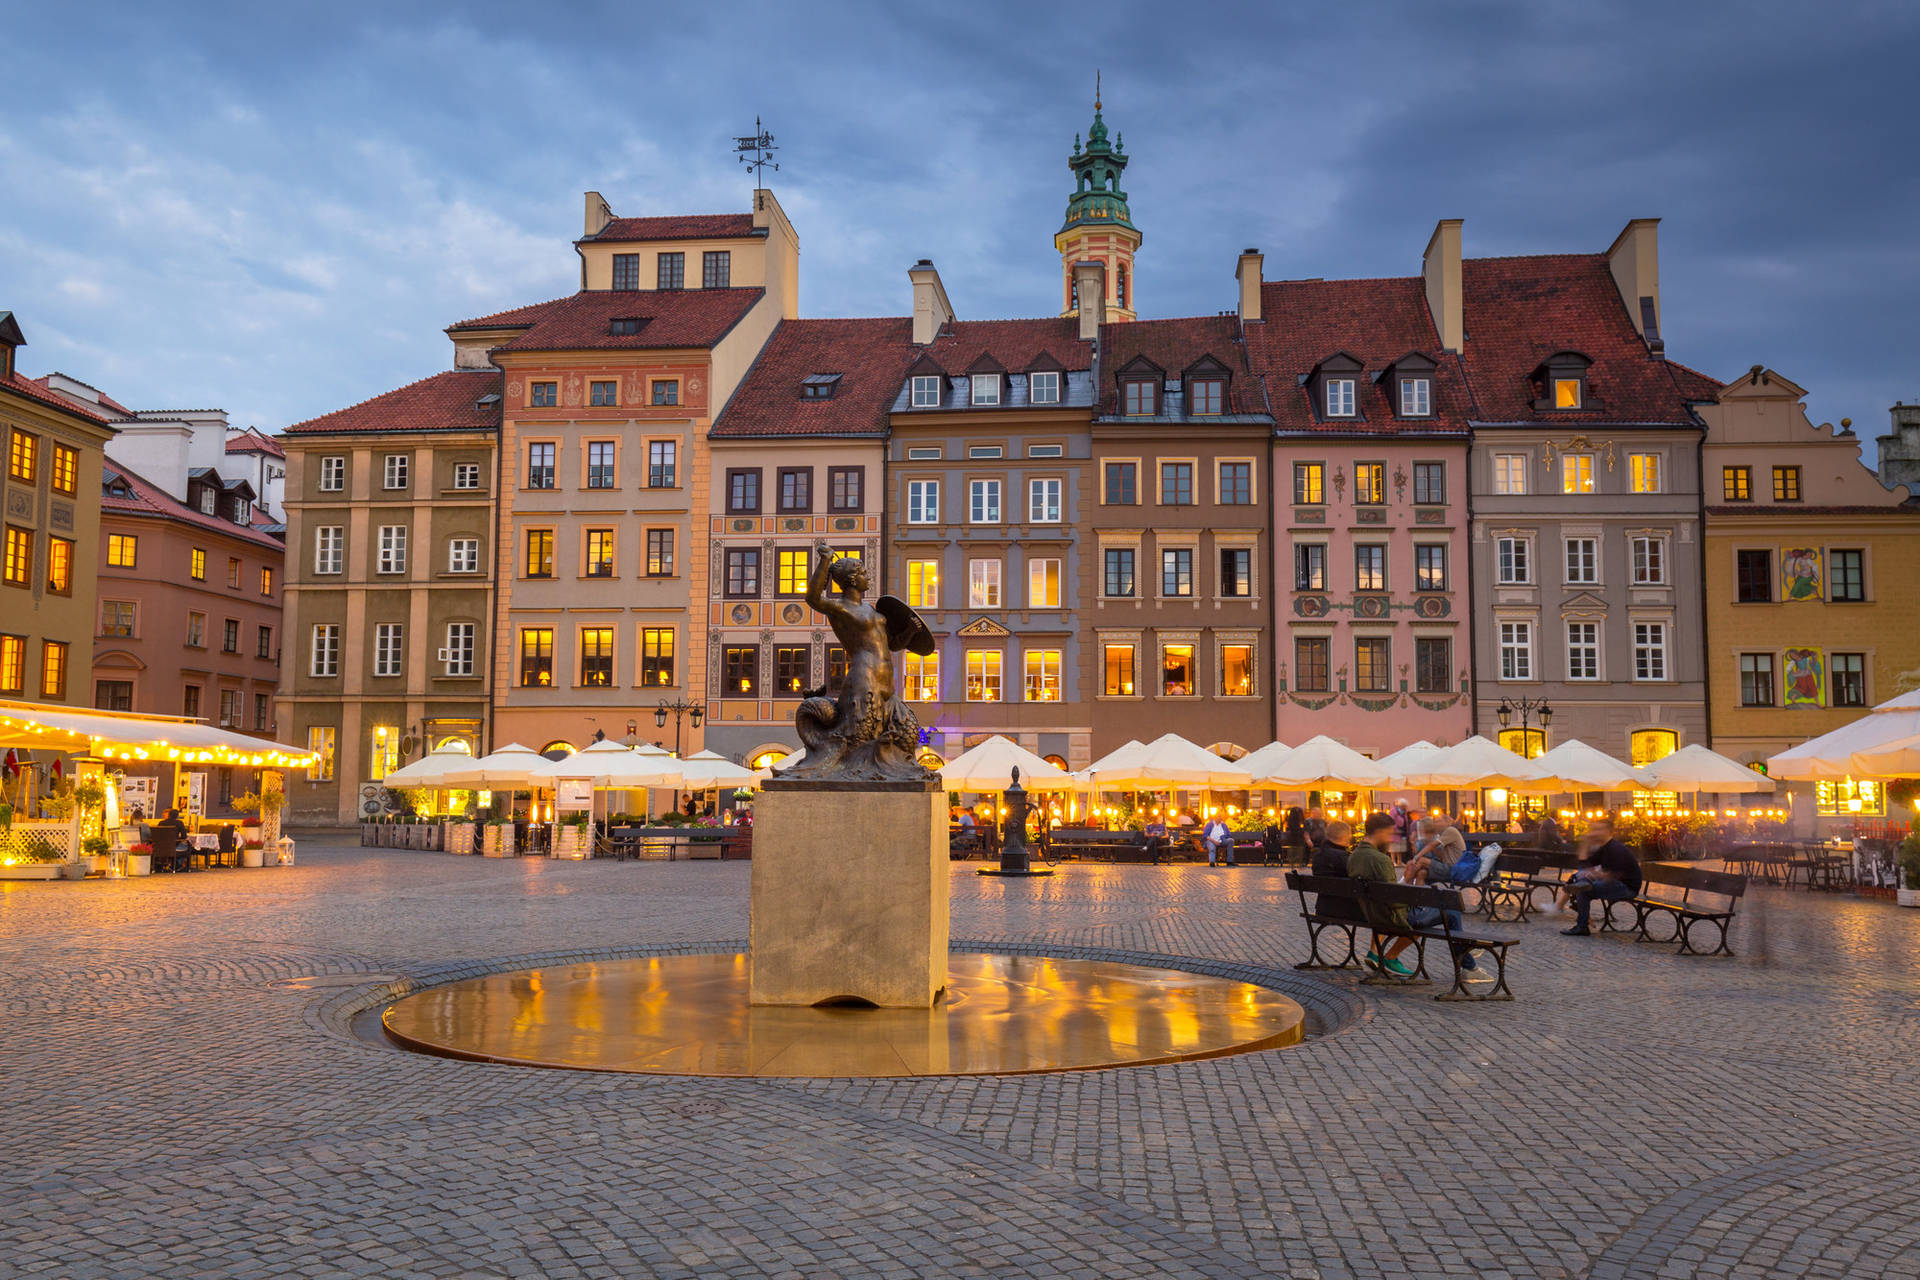 Enchanting Night View of Poland's Old Town Wallpaper